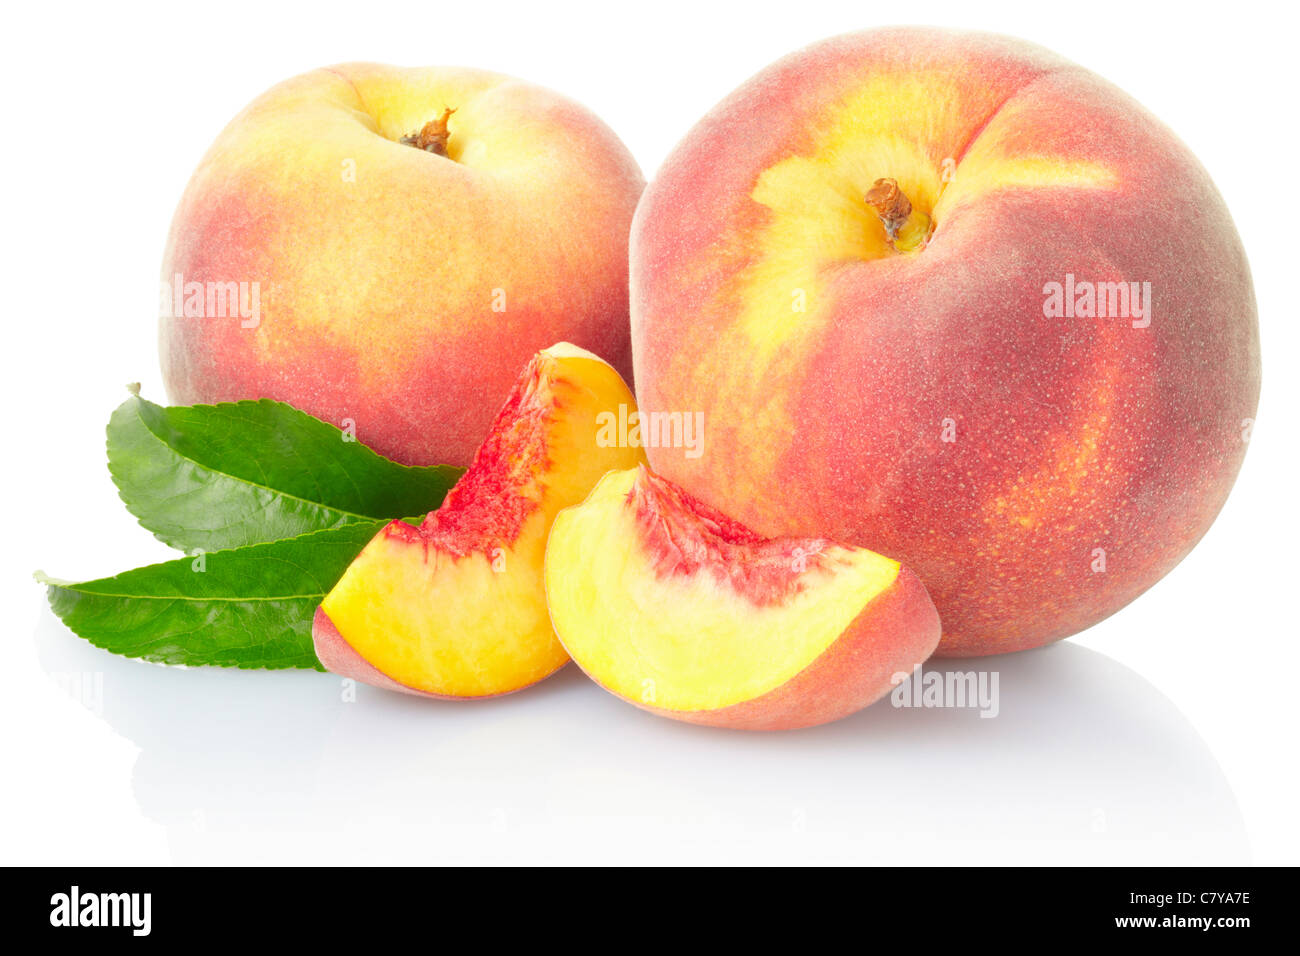 Peach fruit with leaves Stock Photo